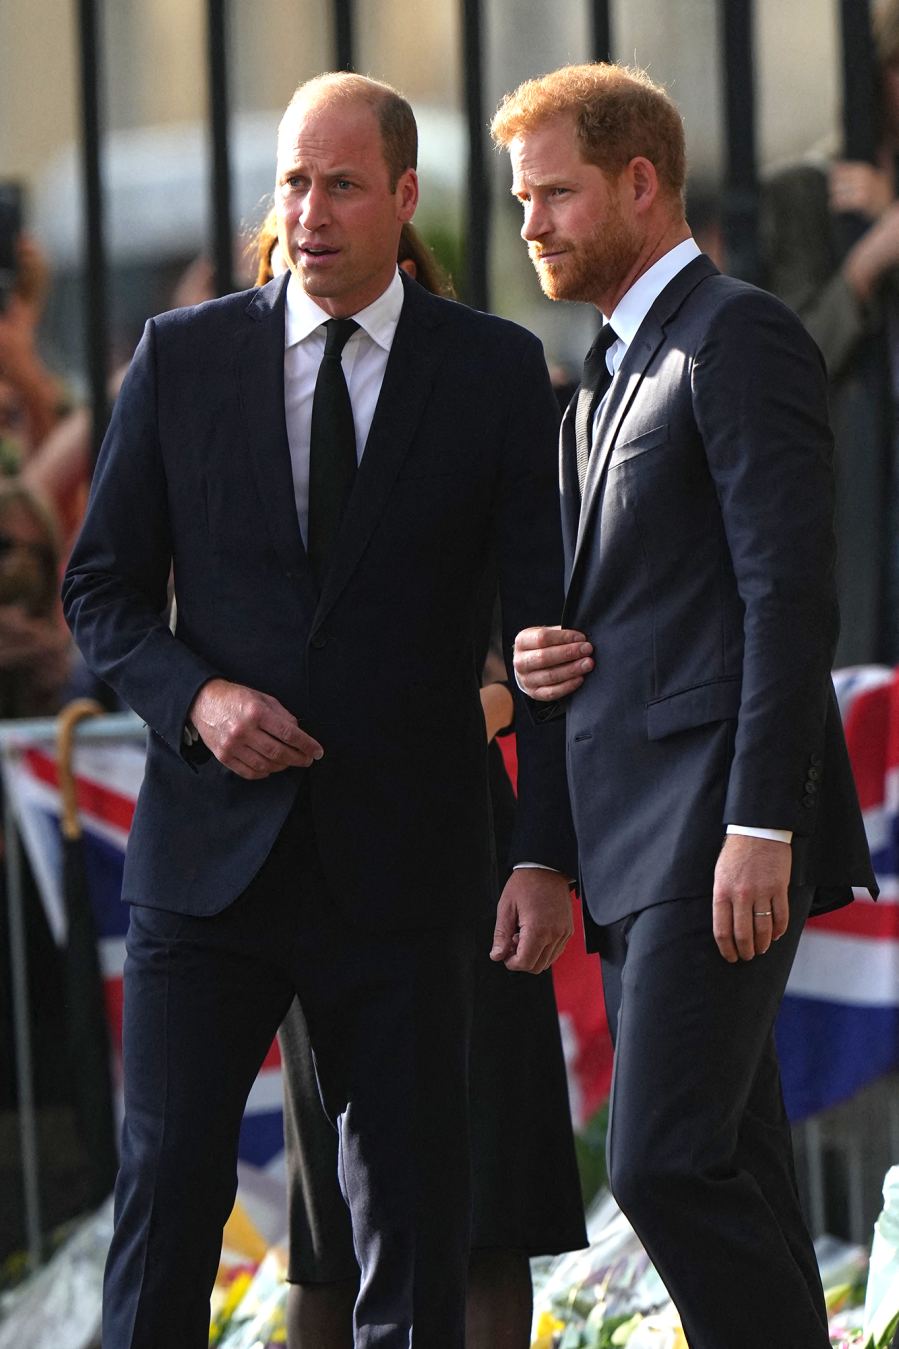 Prince William and Prince Harry Unite to Greet Mourners With Duchess Kate and Meghan Markle